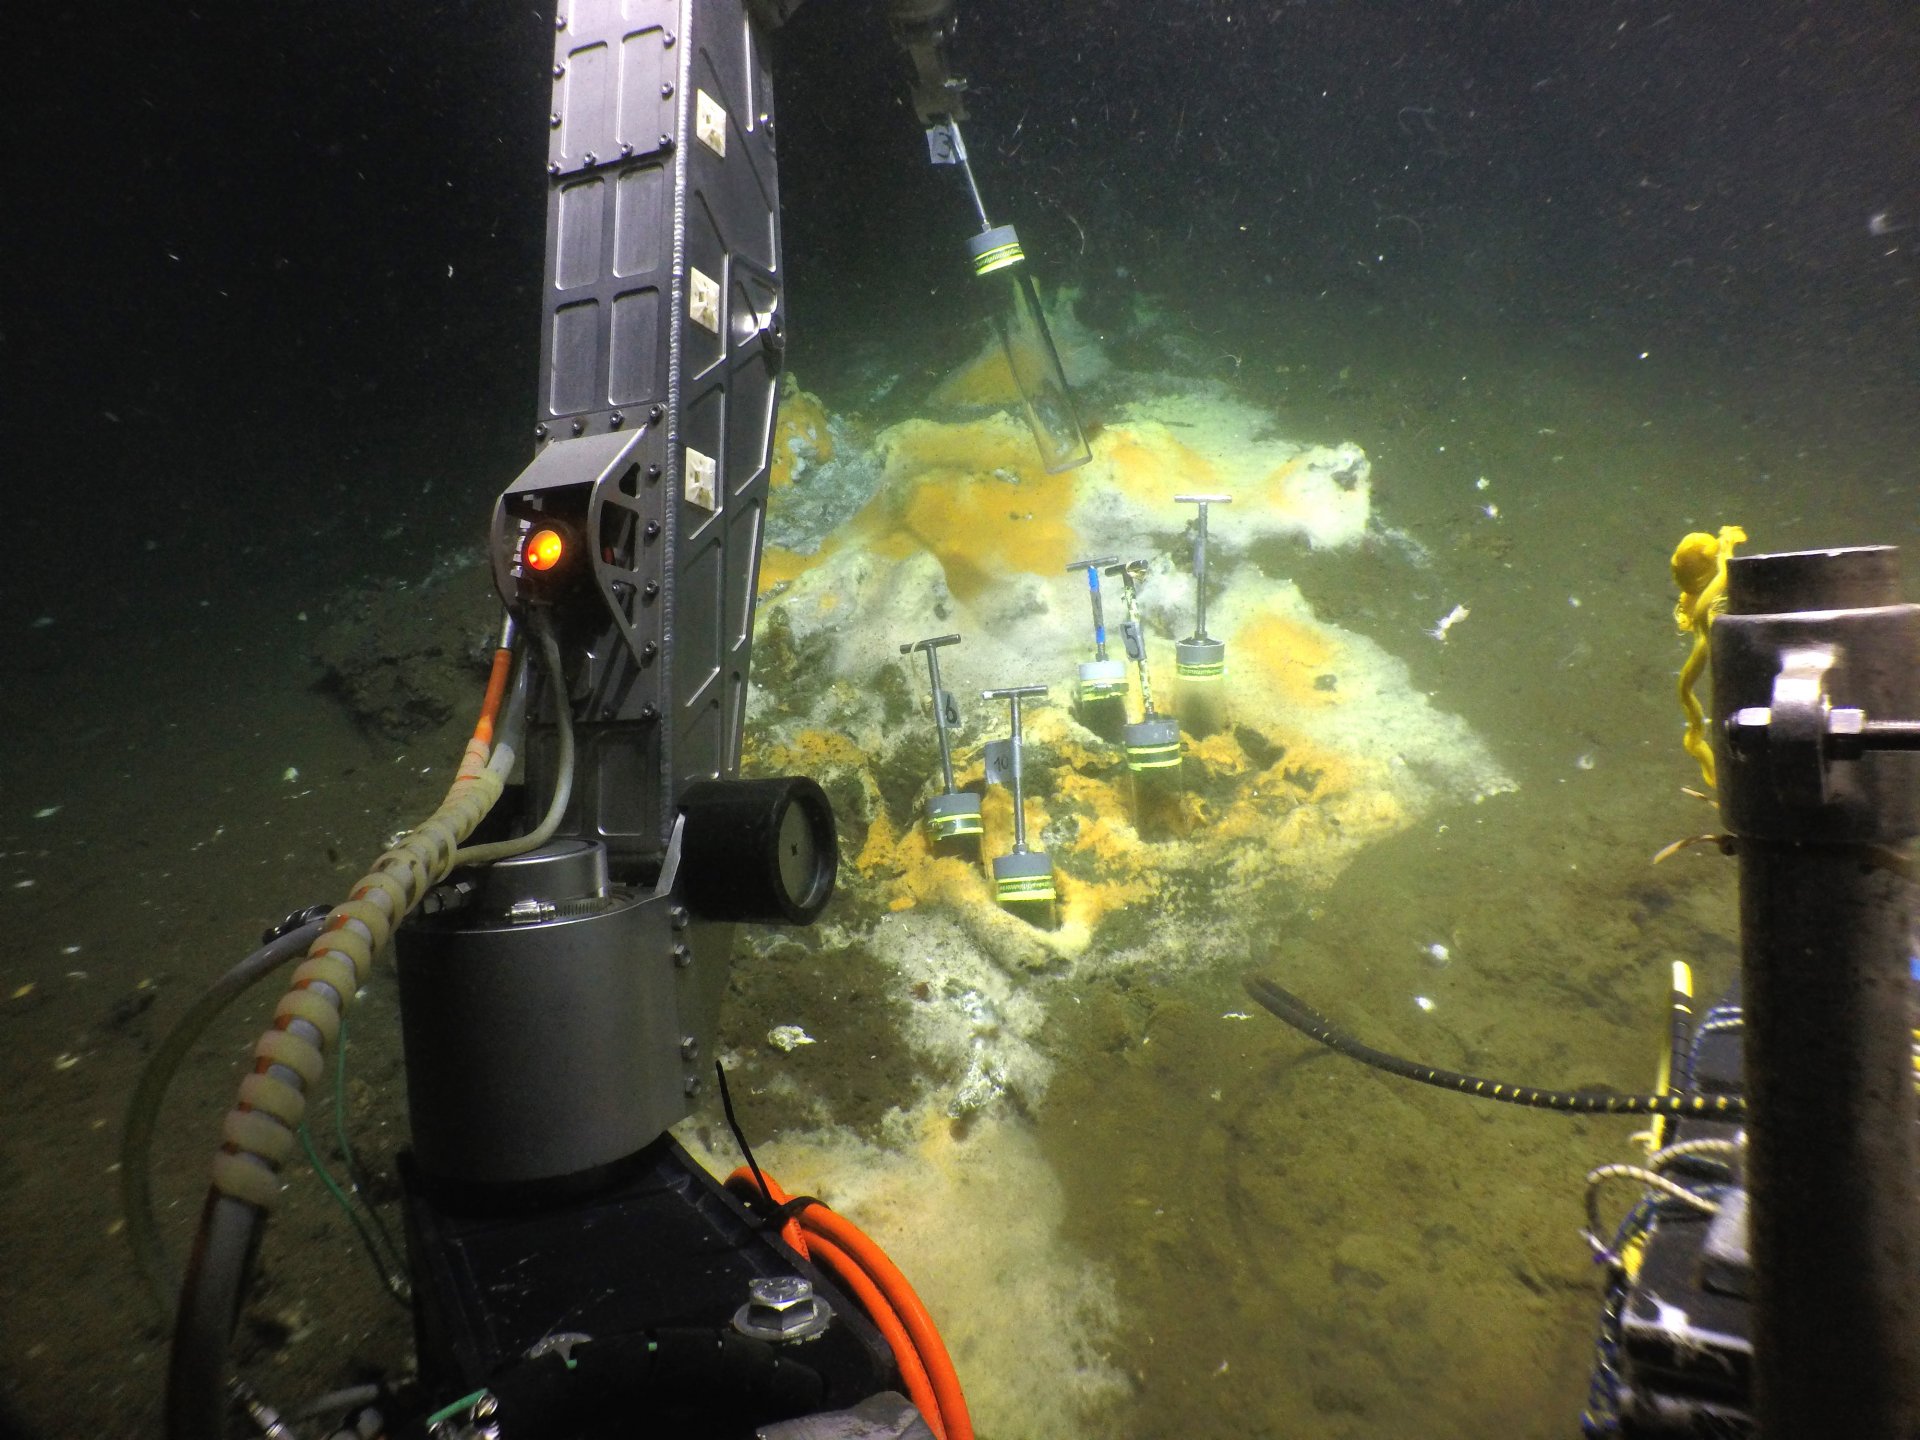 Diving in the Gulf of Mexico: With the submersible ALVIN, the researchers from Bremen were able to reach the seafloor. There they used ALVIN's grab arm to collect sediment cores from the seabed. White-orange coloured microbial mats made of sulfur-oxidizin